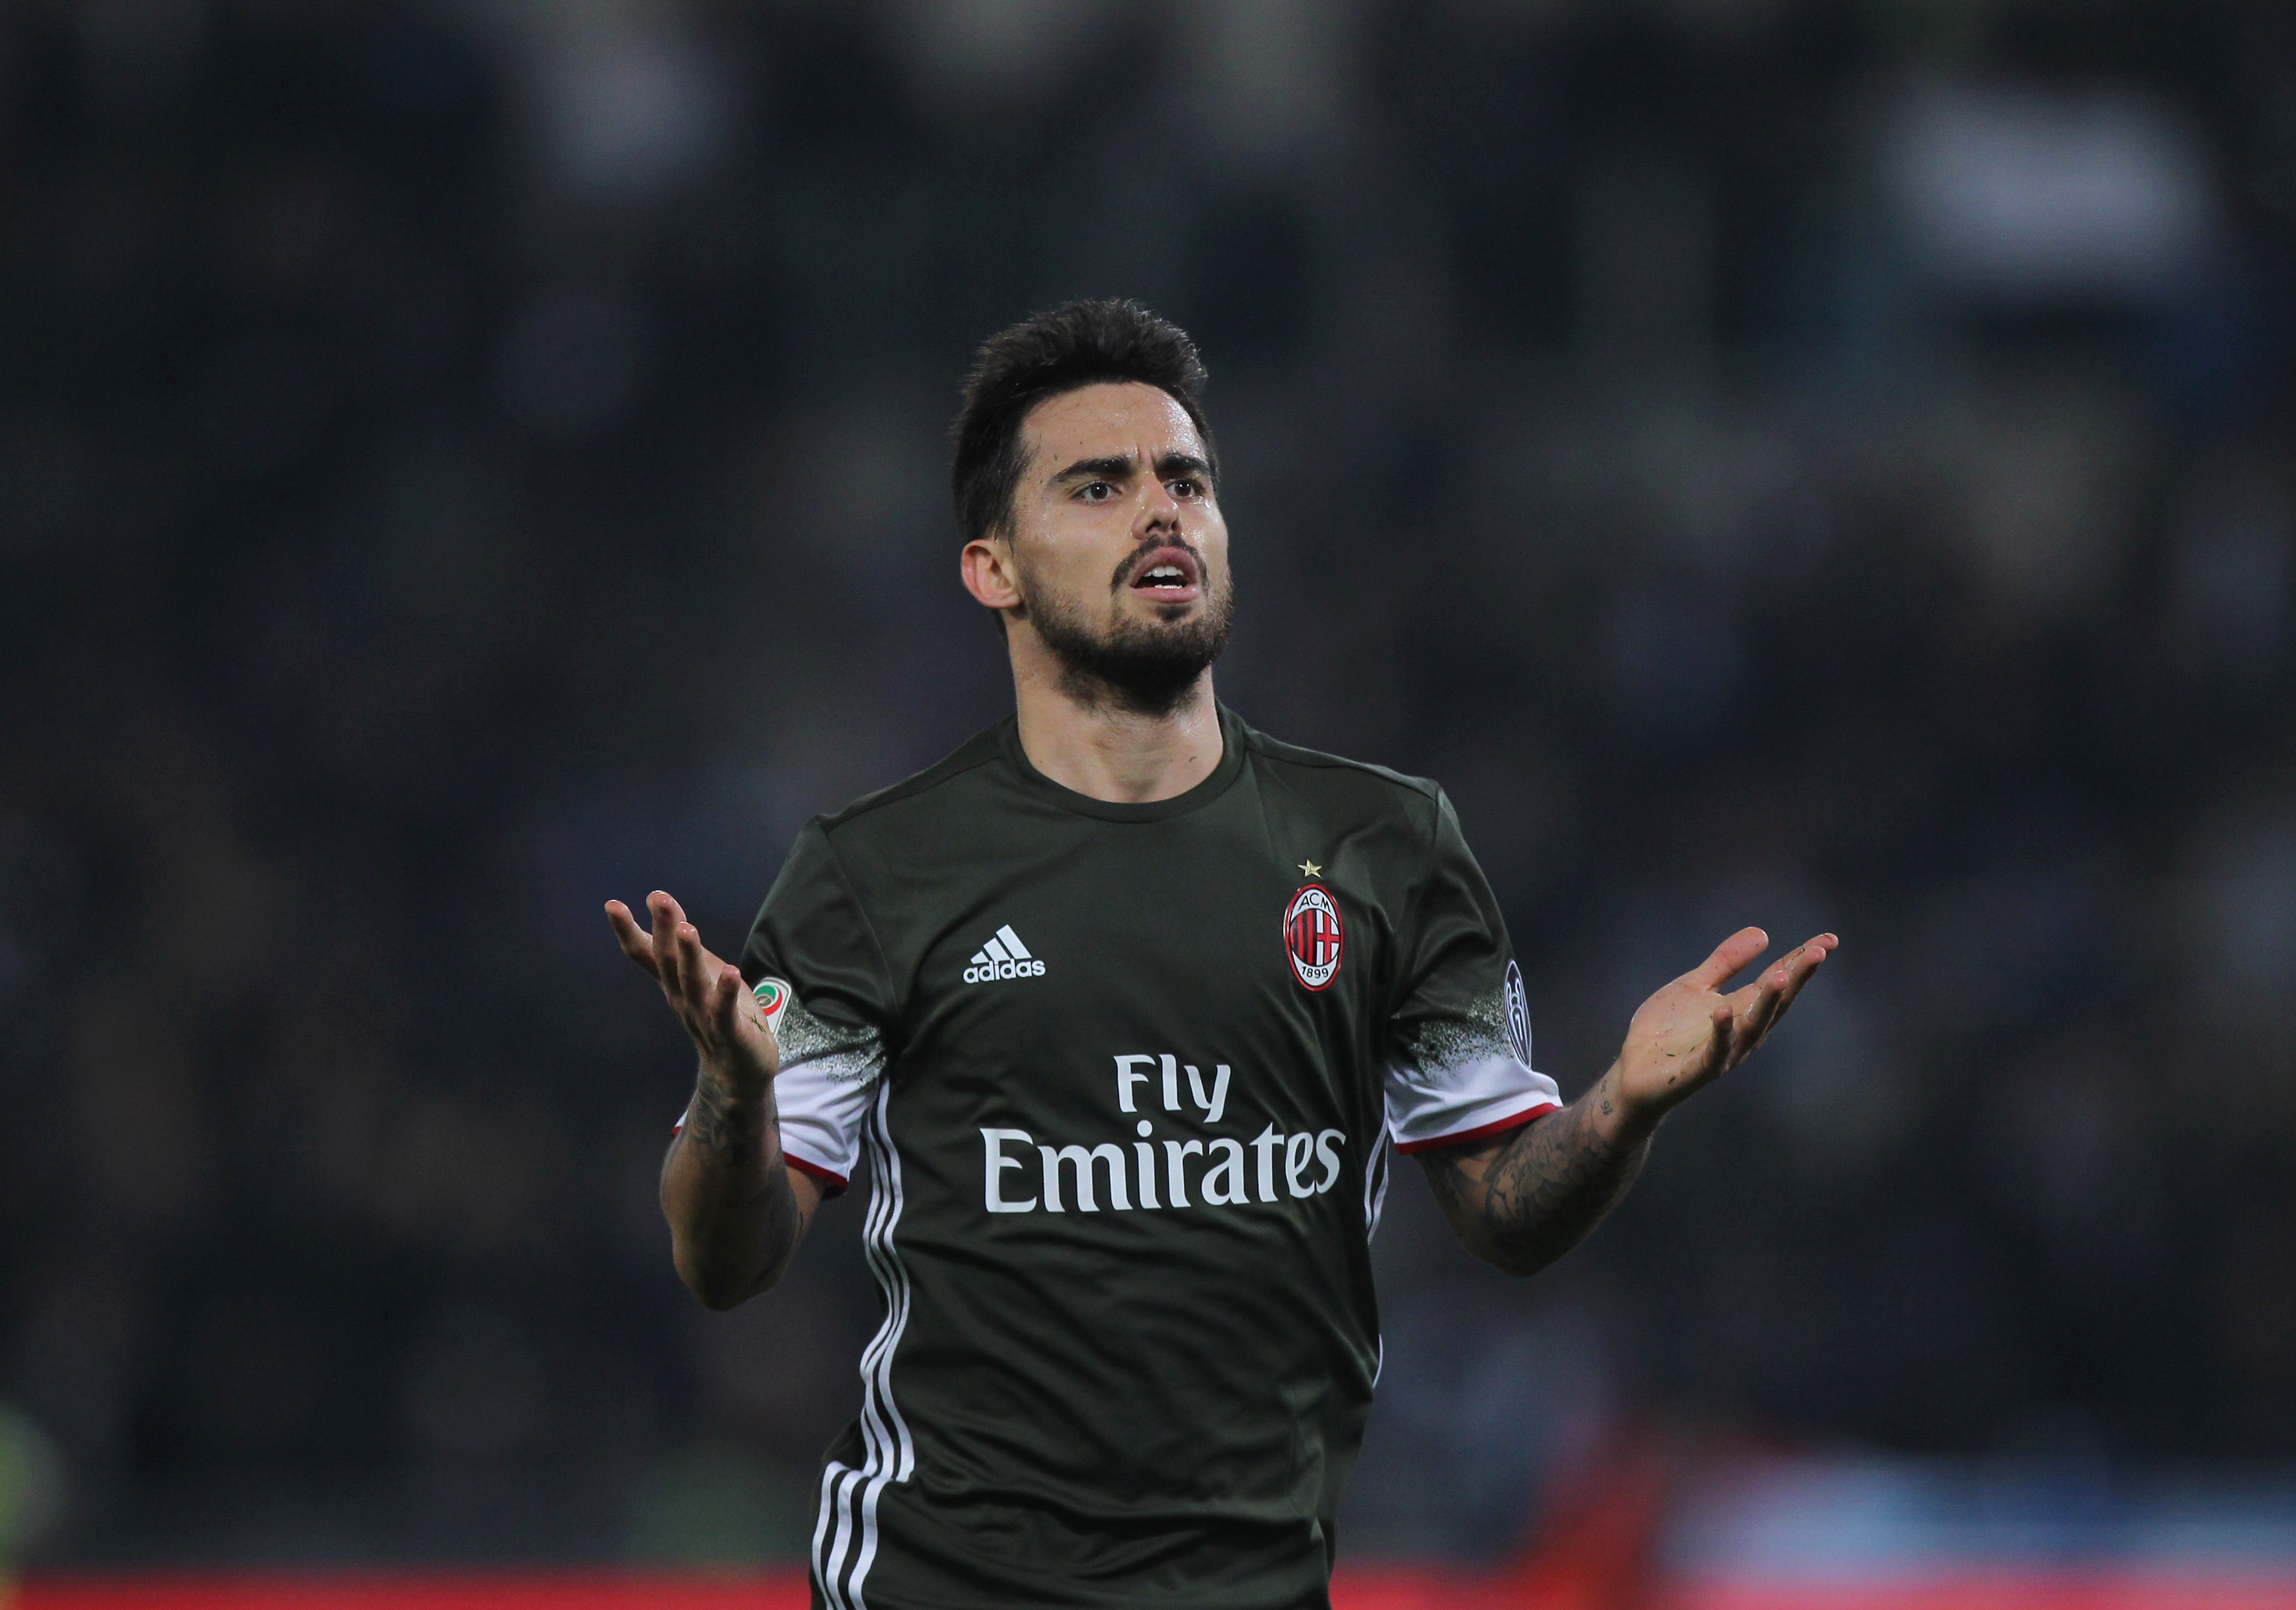 ROME, ITALY - FEBRUARY 13:  Fernandez Suso of AC Milan celebrates after scoring the team's first goal during the Serie A match between SS Lazio and AC Milan at Stadio Olimpico on February 13, 2017 in Rome, Italy.  (Photo by Paolo Bruno/Getty Images)